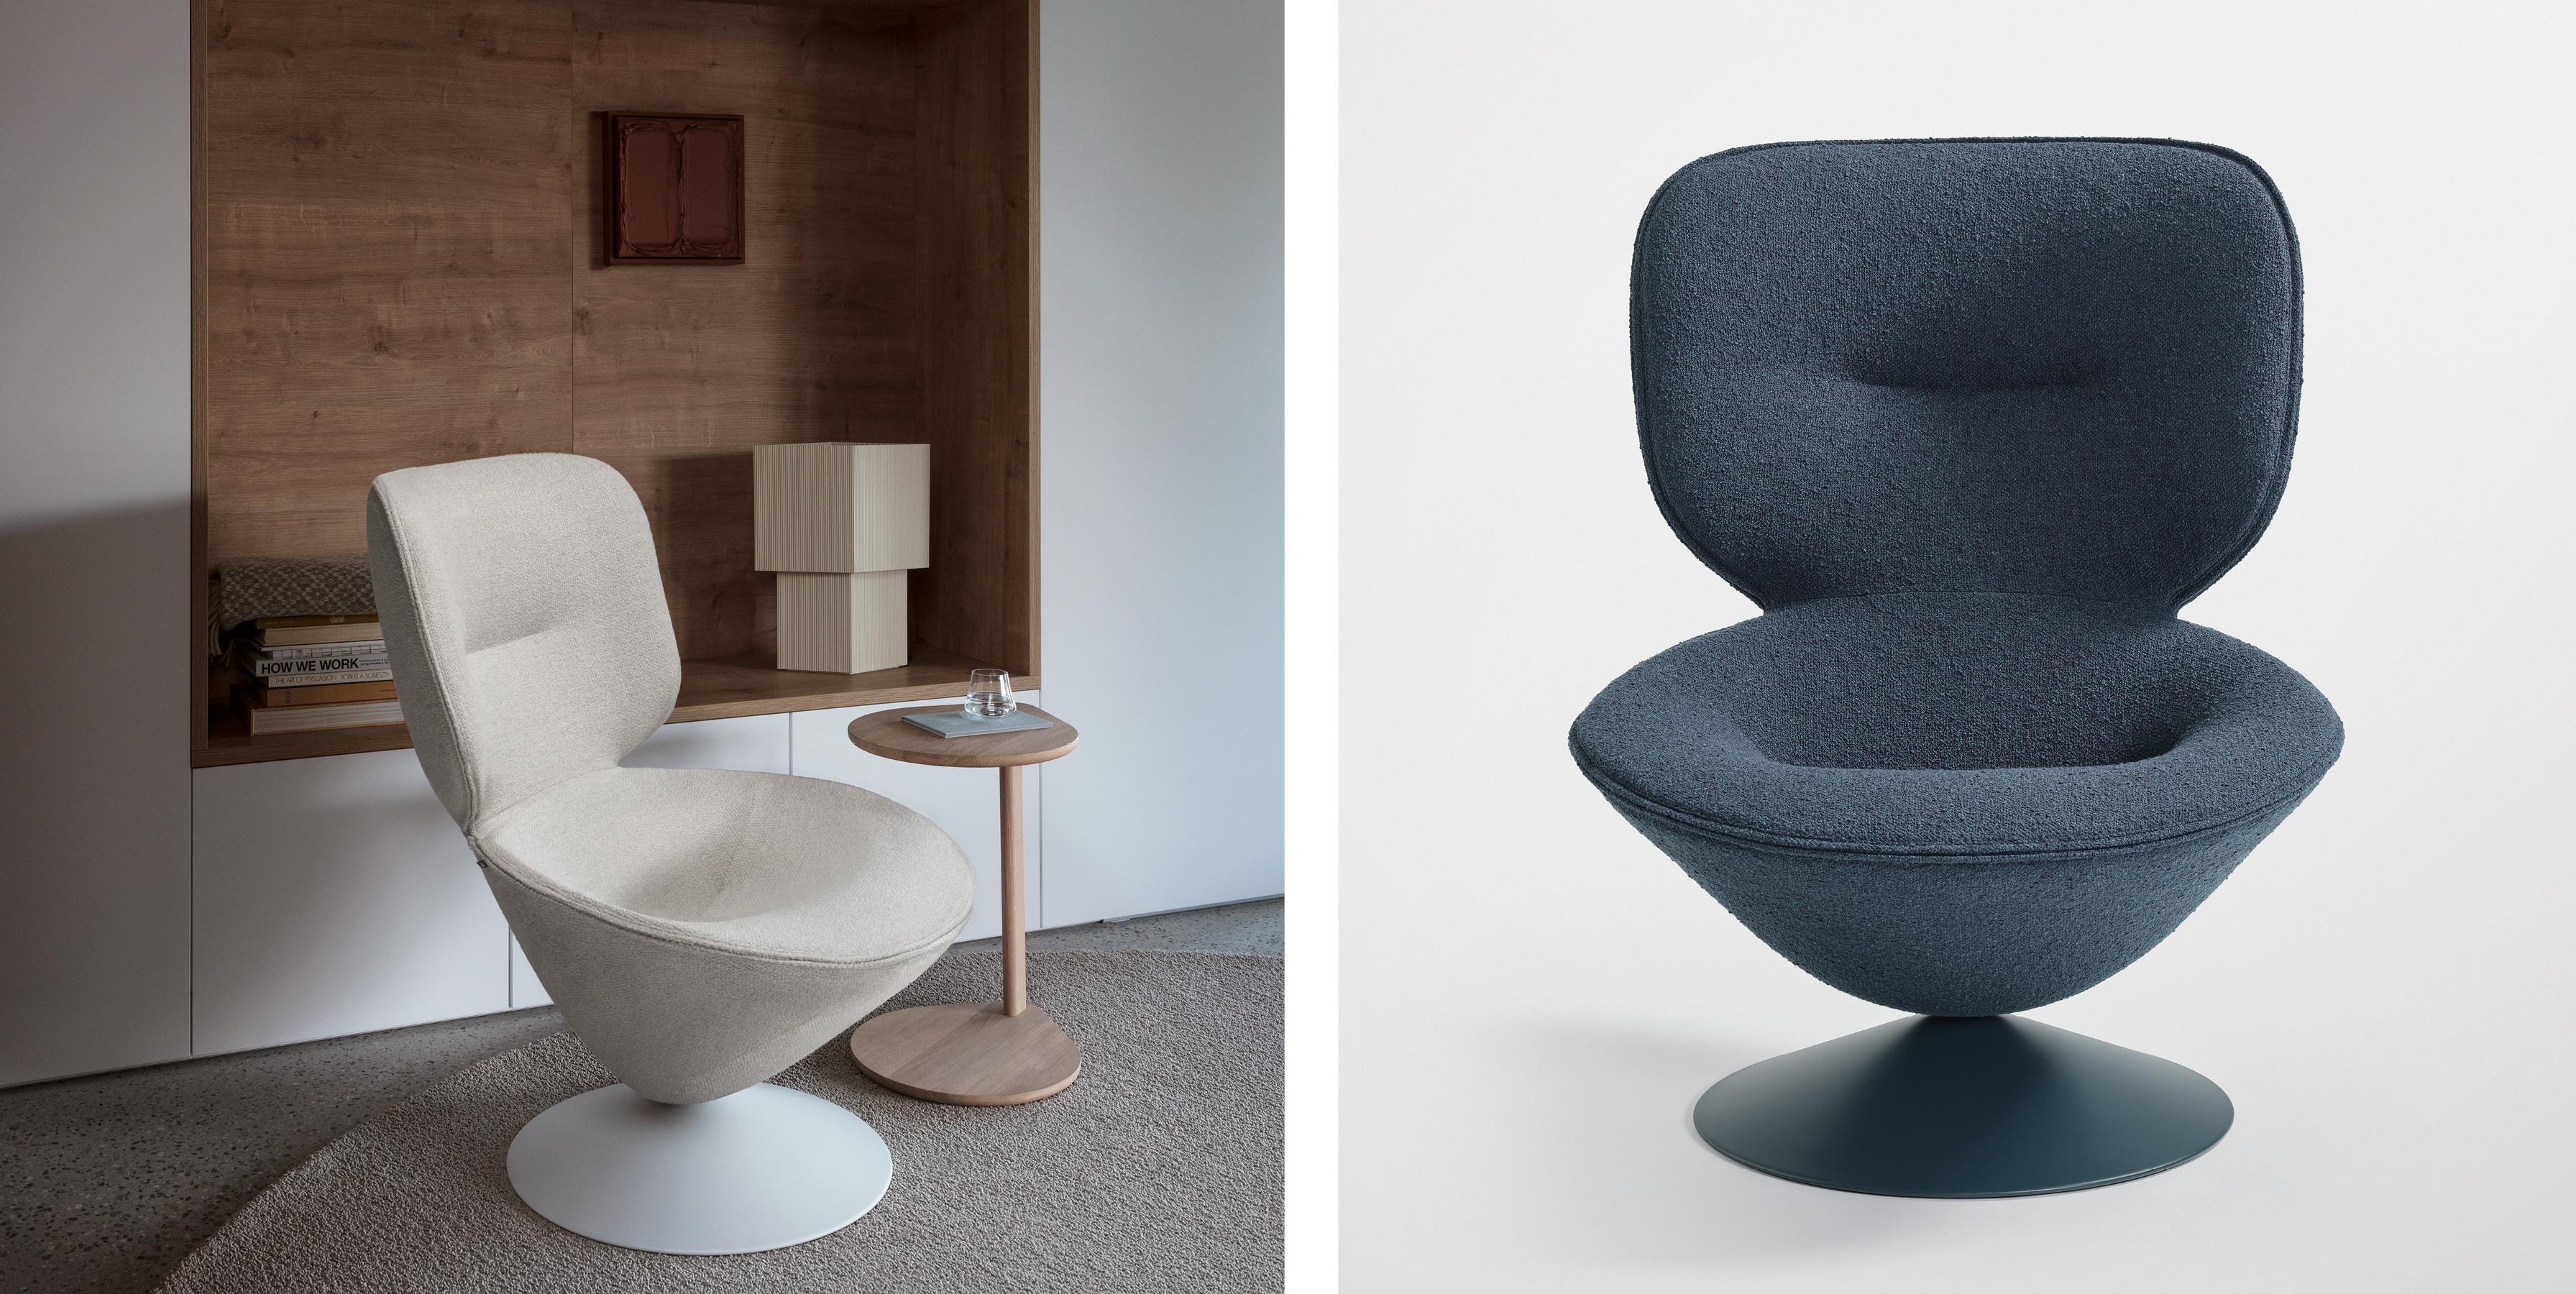 Moon
Comfort and art
Moon, by designer Patrick Norguet, emphasises the notion of comfort, art and a progressive character. An inviting, high-backed armchair, Moon catches the eye in any interior. The design evokes the phenomenon of weightlessness by